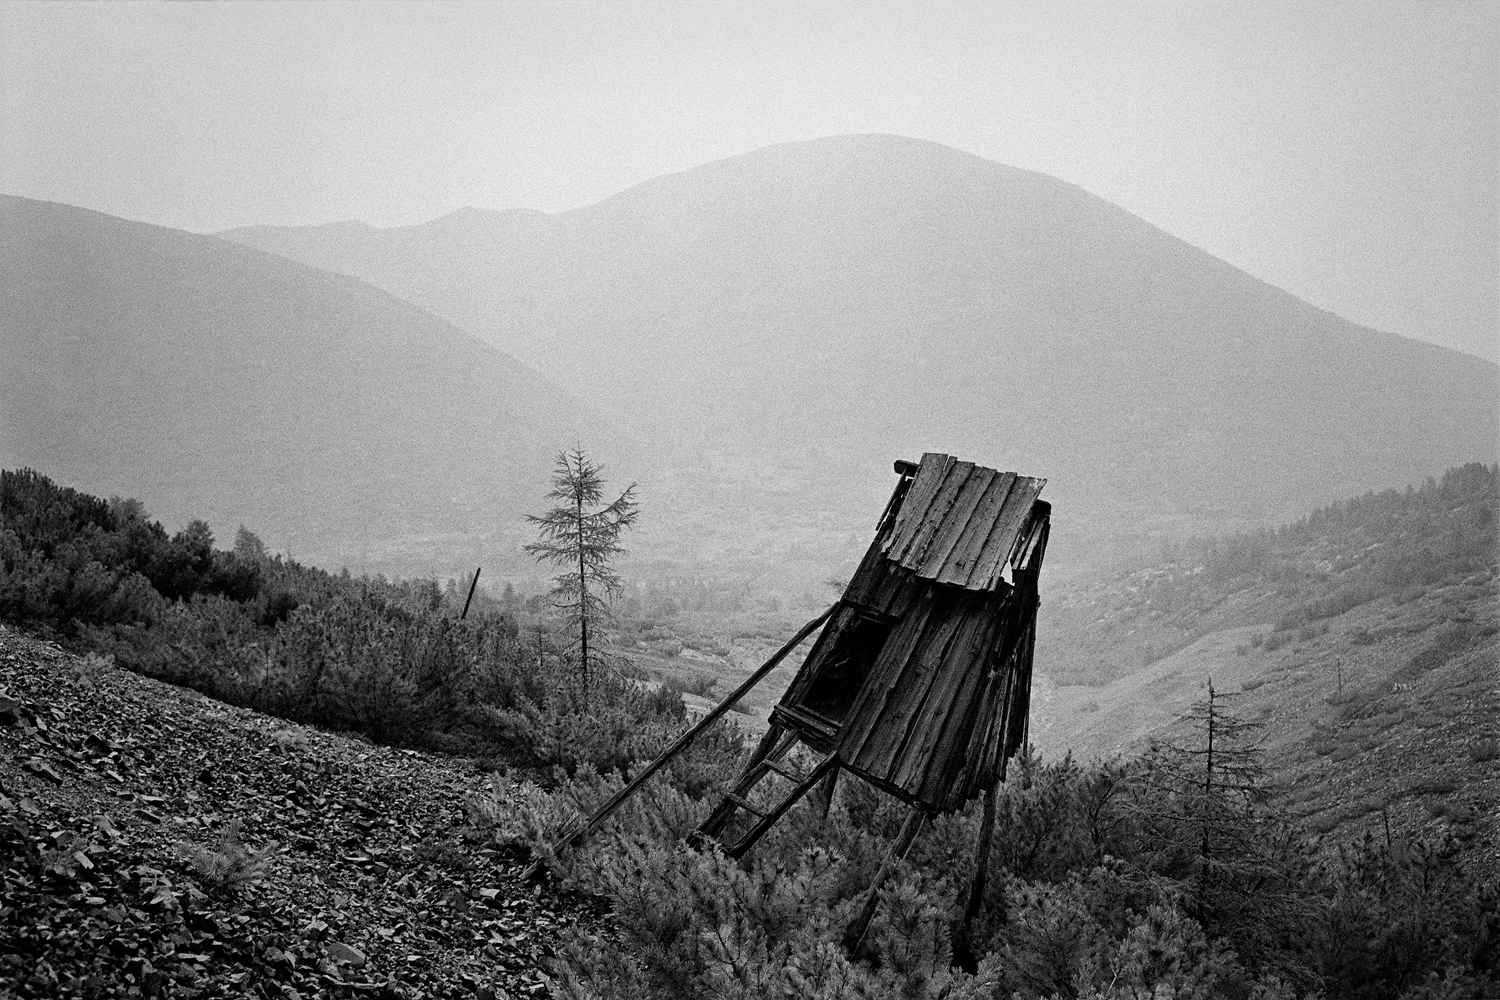 Dneprovsky is one of the few extant camps of the Kolyma Gulag. From 1941 to 1955 there was a pit tin mine where ordinary prisoners, "especially dangerous criminals" and former Soviet POWs labored.